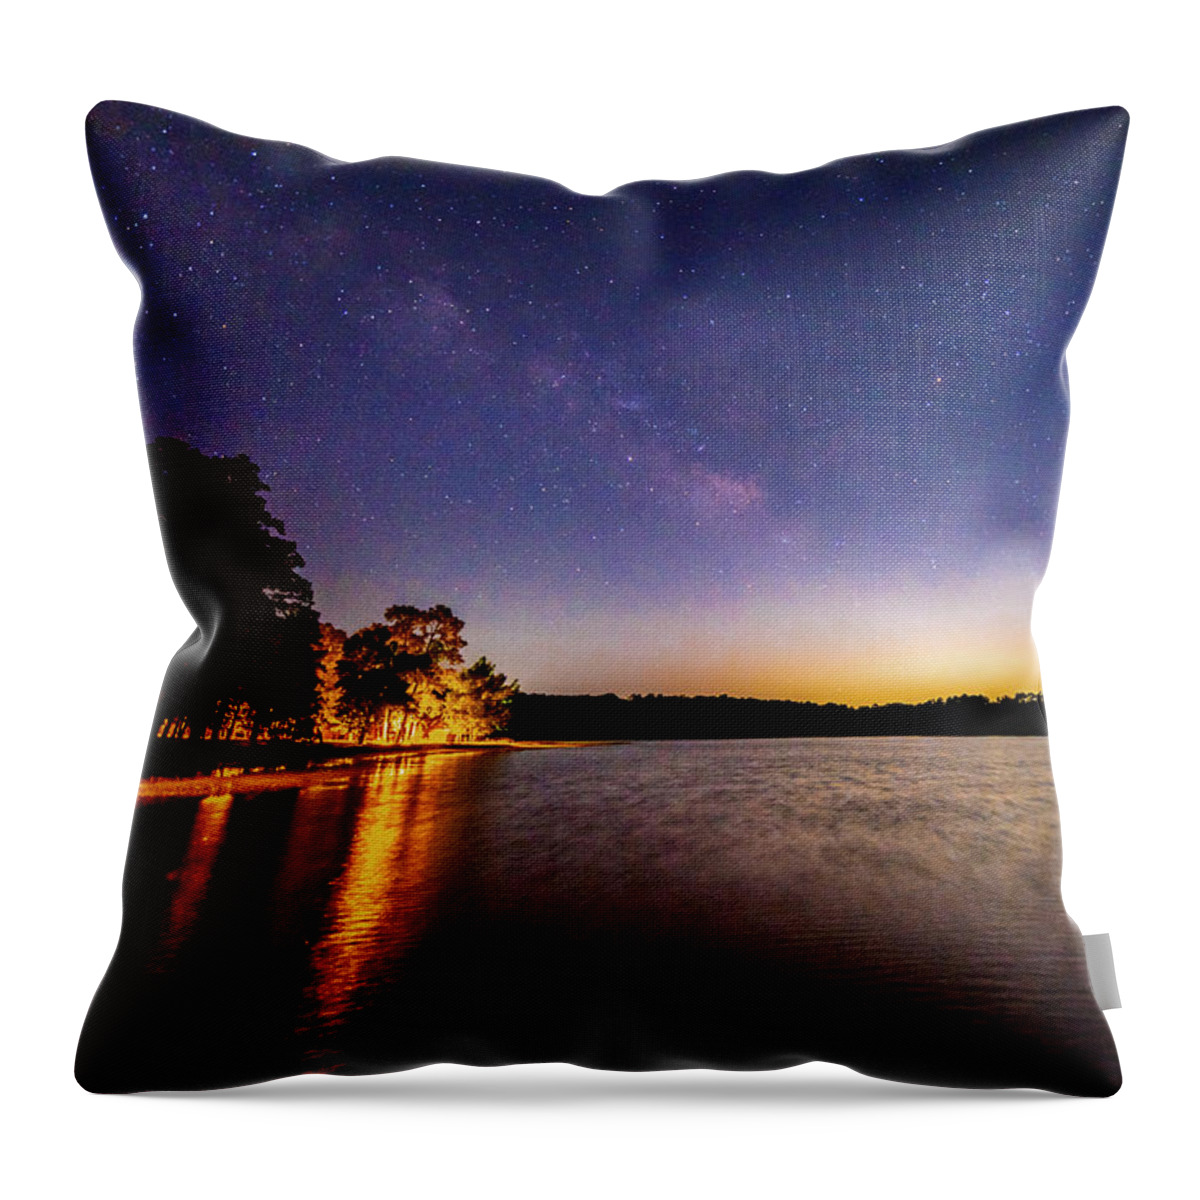 2018 Throw Pillow featuring the photograph Milky Way Hunt by Erin K Images